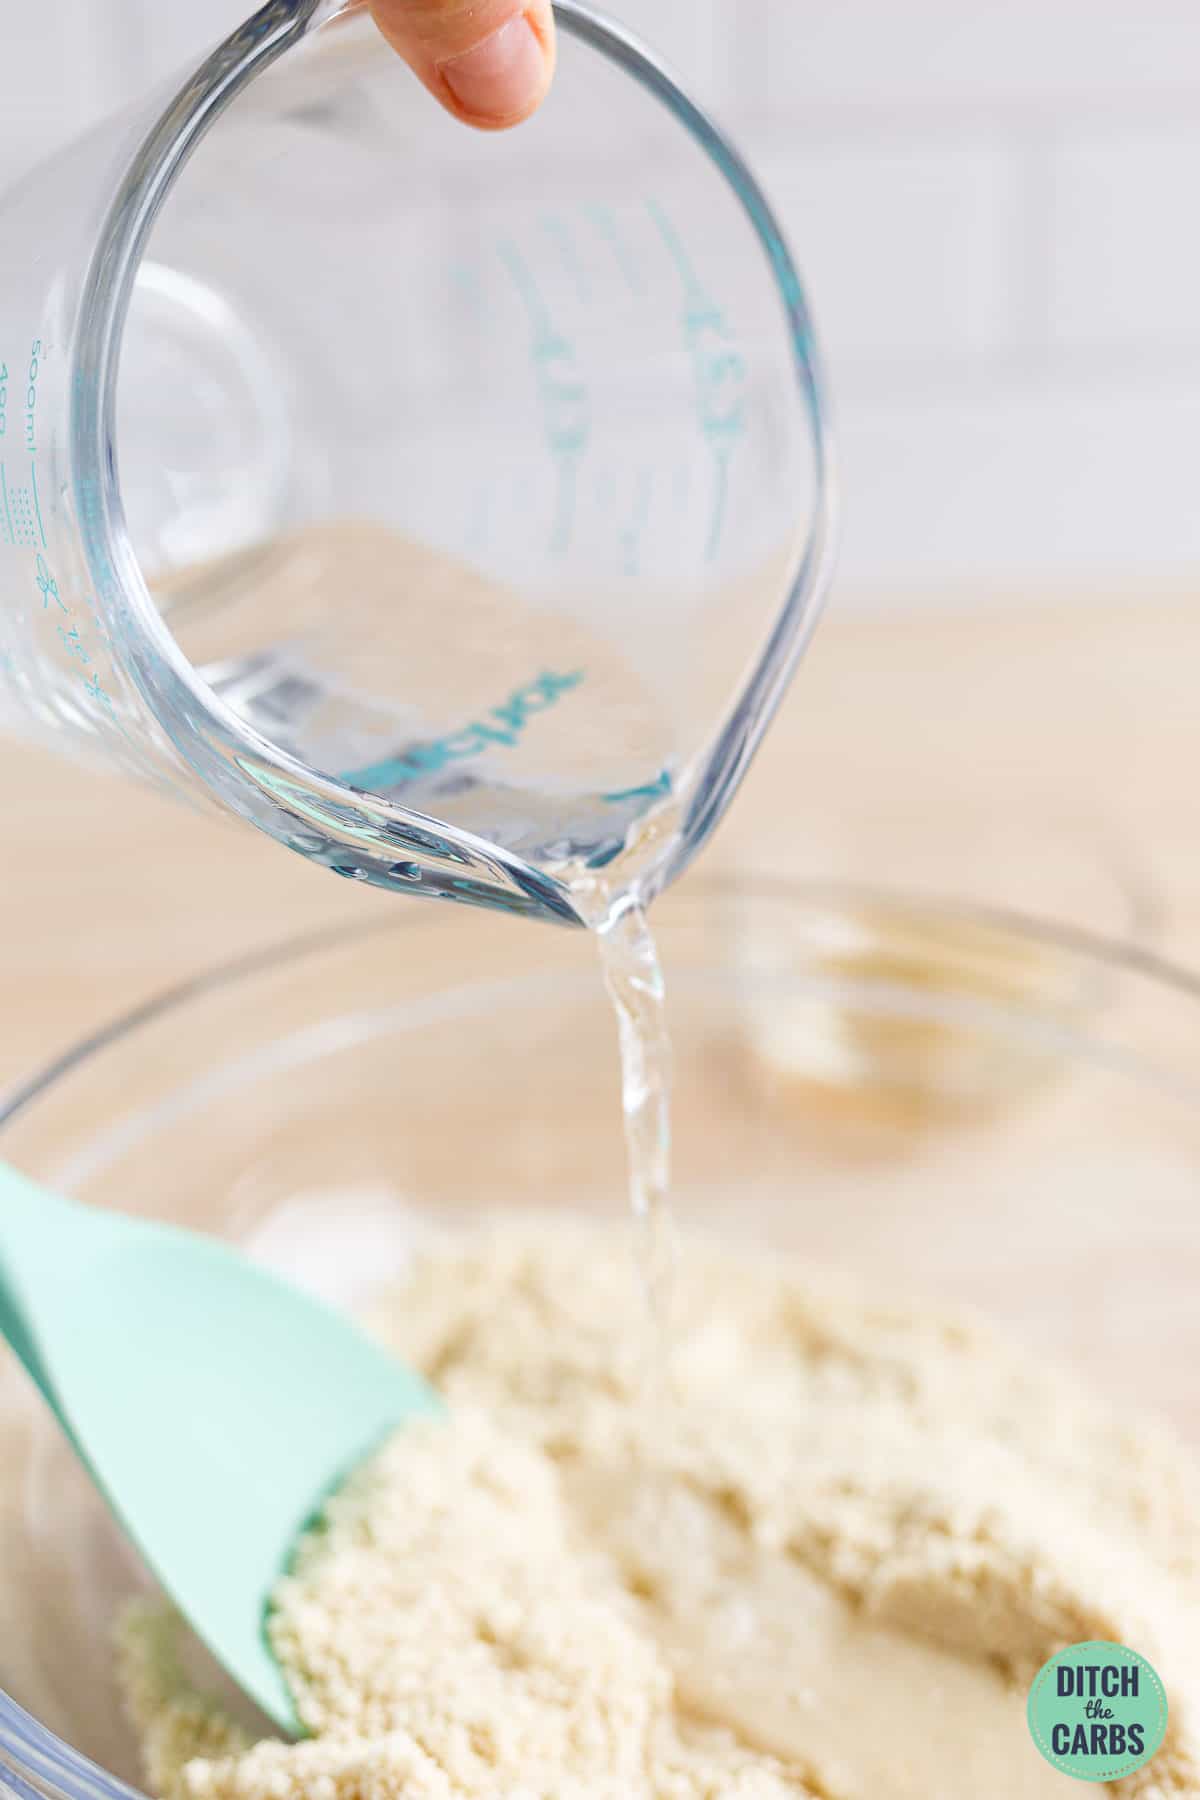 Pour water into a bowl to mix together low-carb pita bread dough.